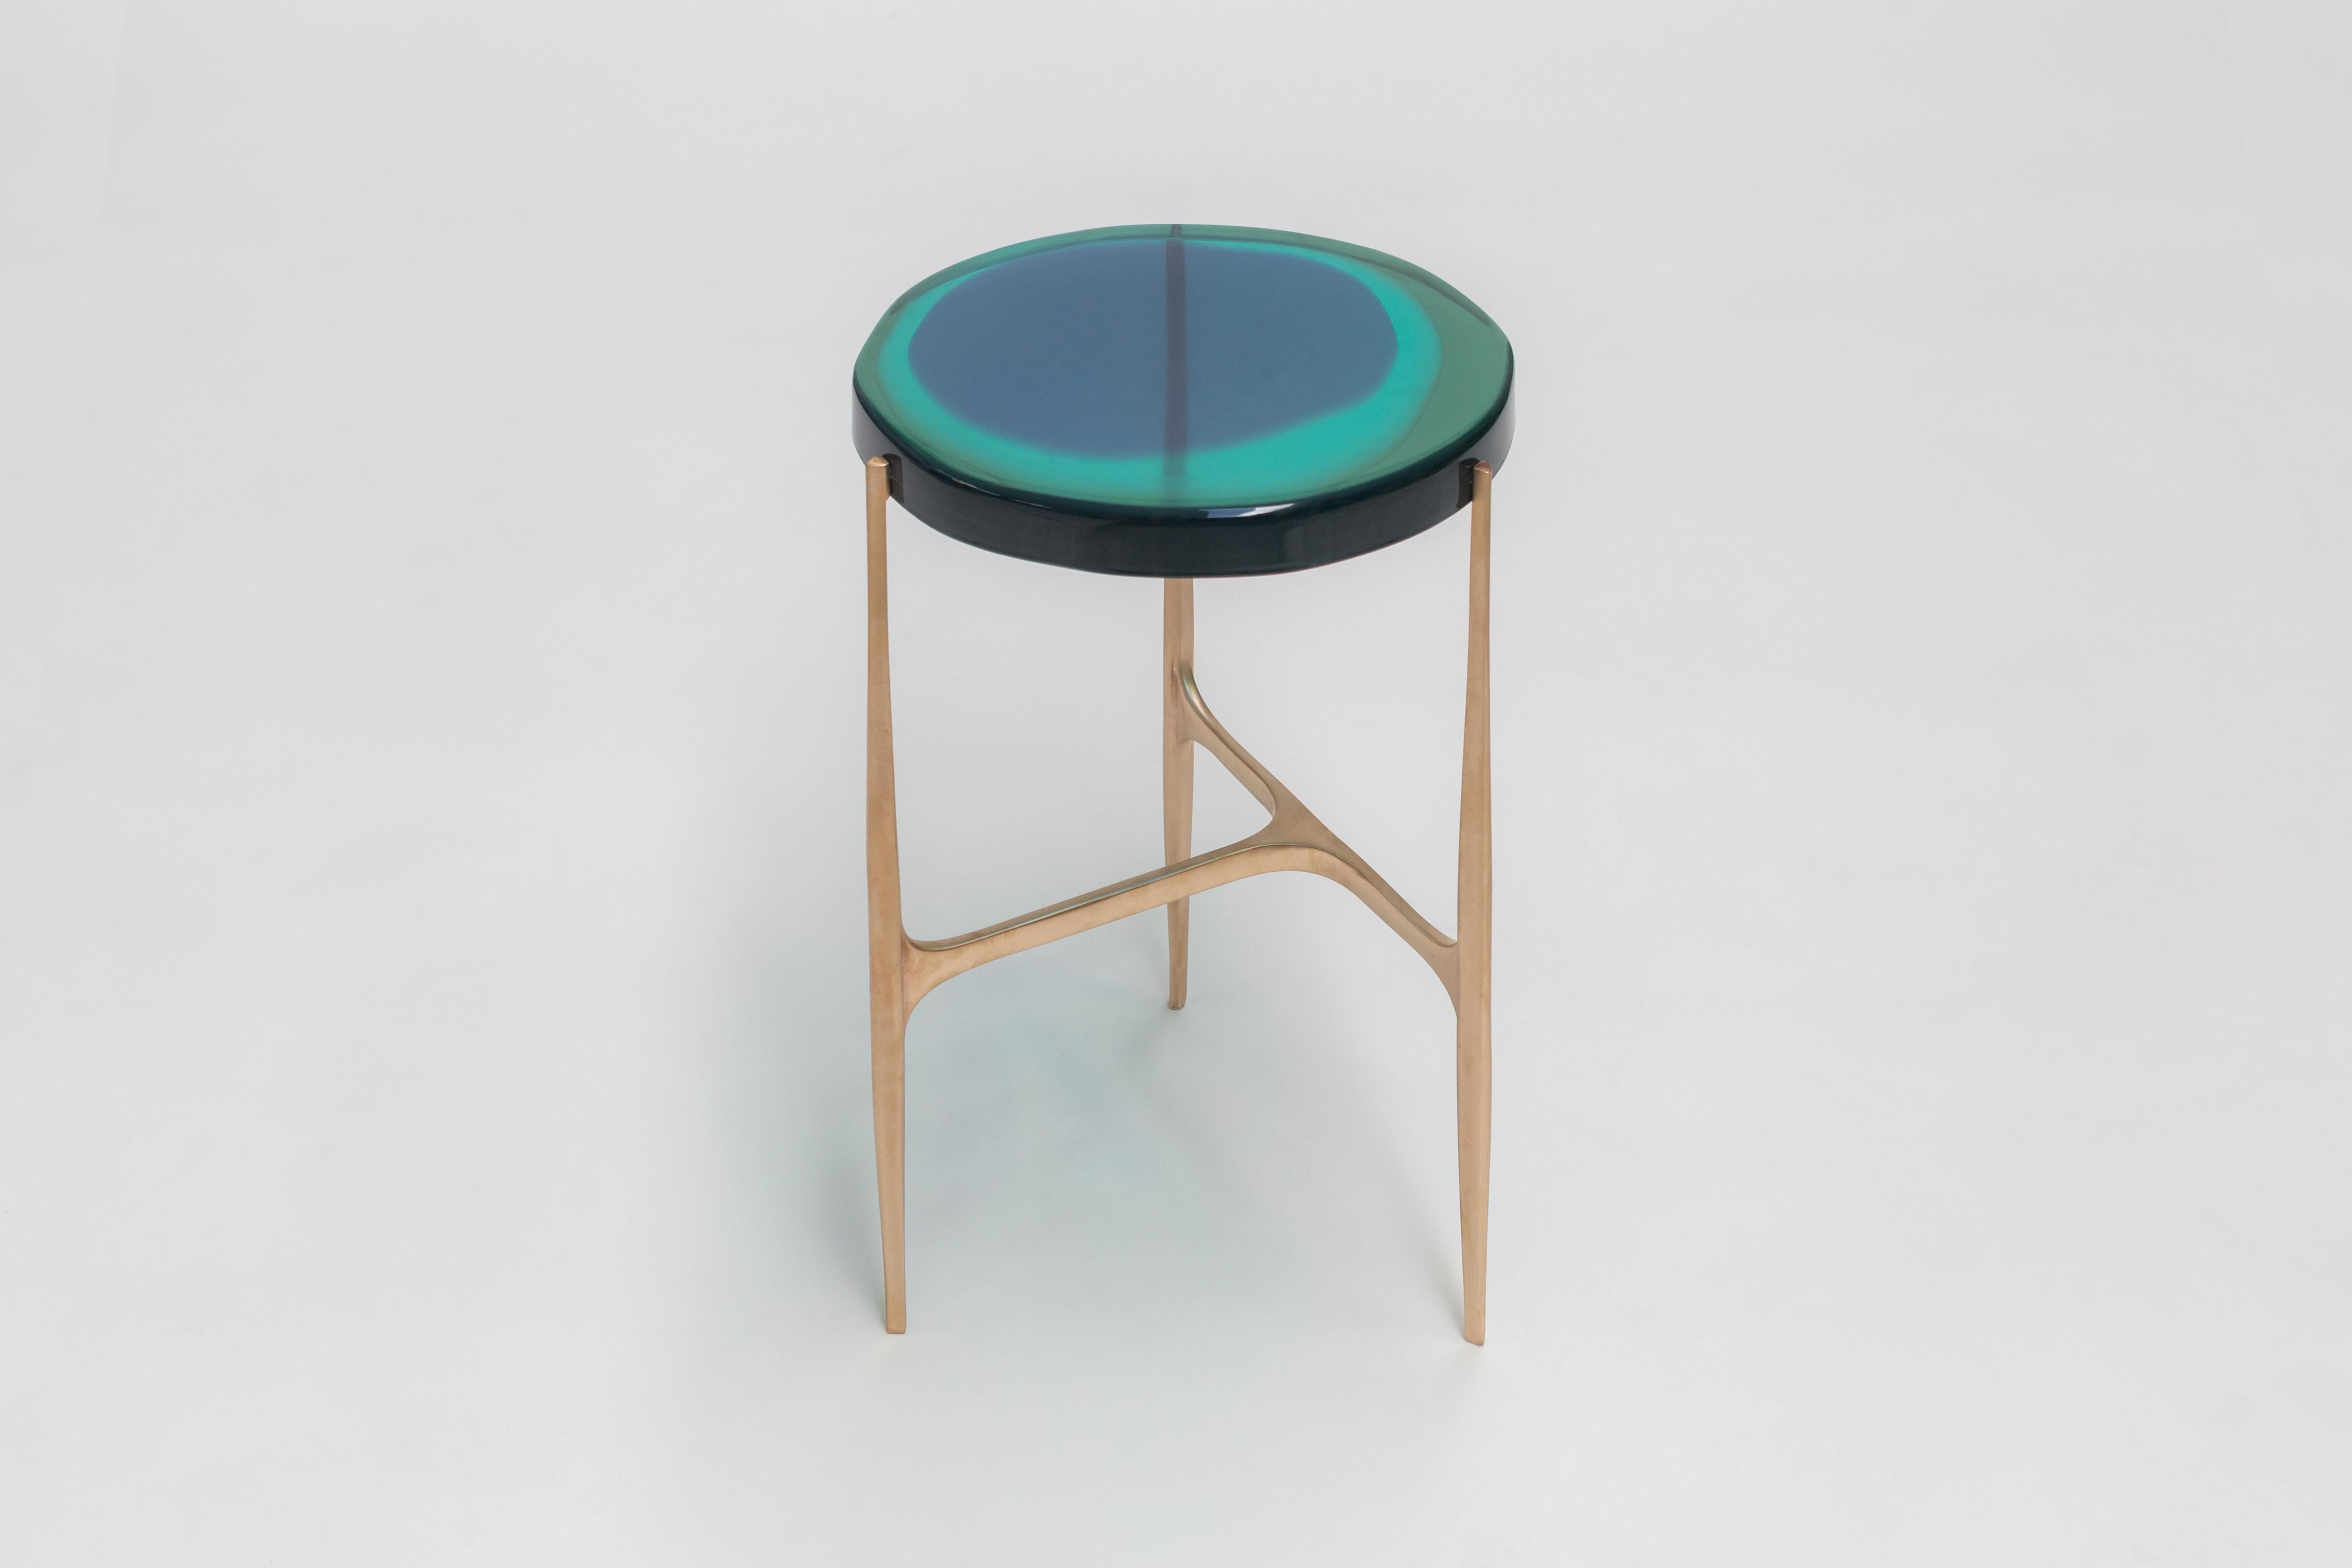 Dialoghi Mimetici collection by Draga & Aurel:
Coffee table, formed from cast resin and cast bronze. The process of creating the transparent and colorful top requires a special technique of casting resin into the mould in three layers of colored